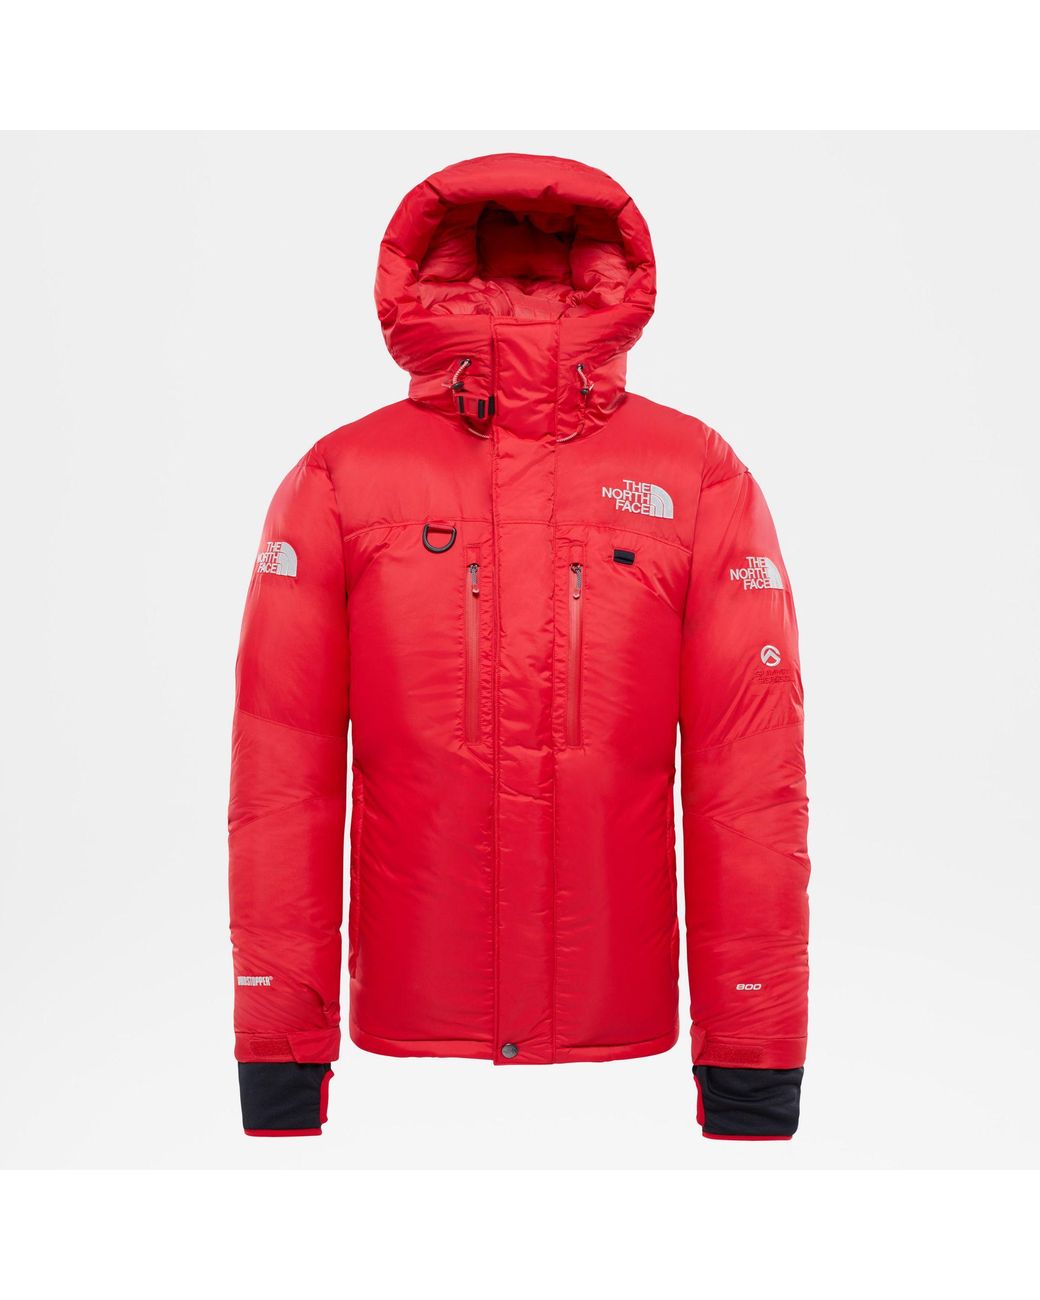 The North Face Men's Summit Series Himalayan Parka Tnf Red/tnf in 